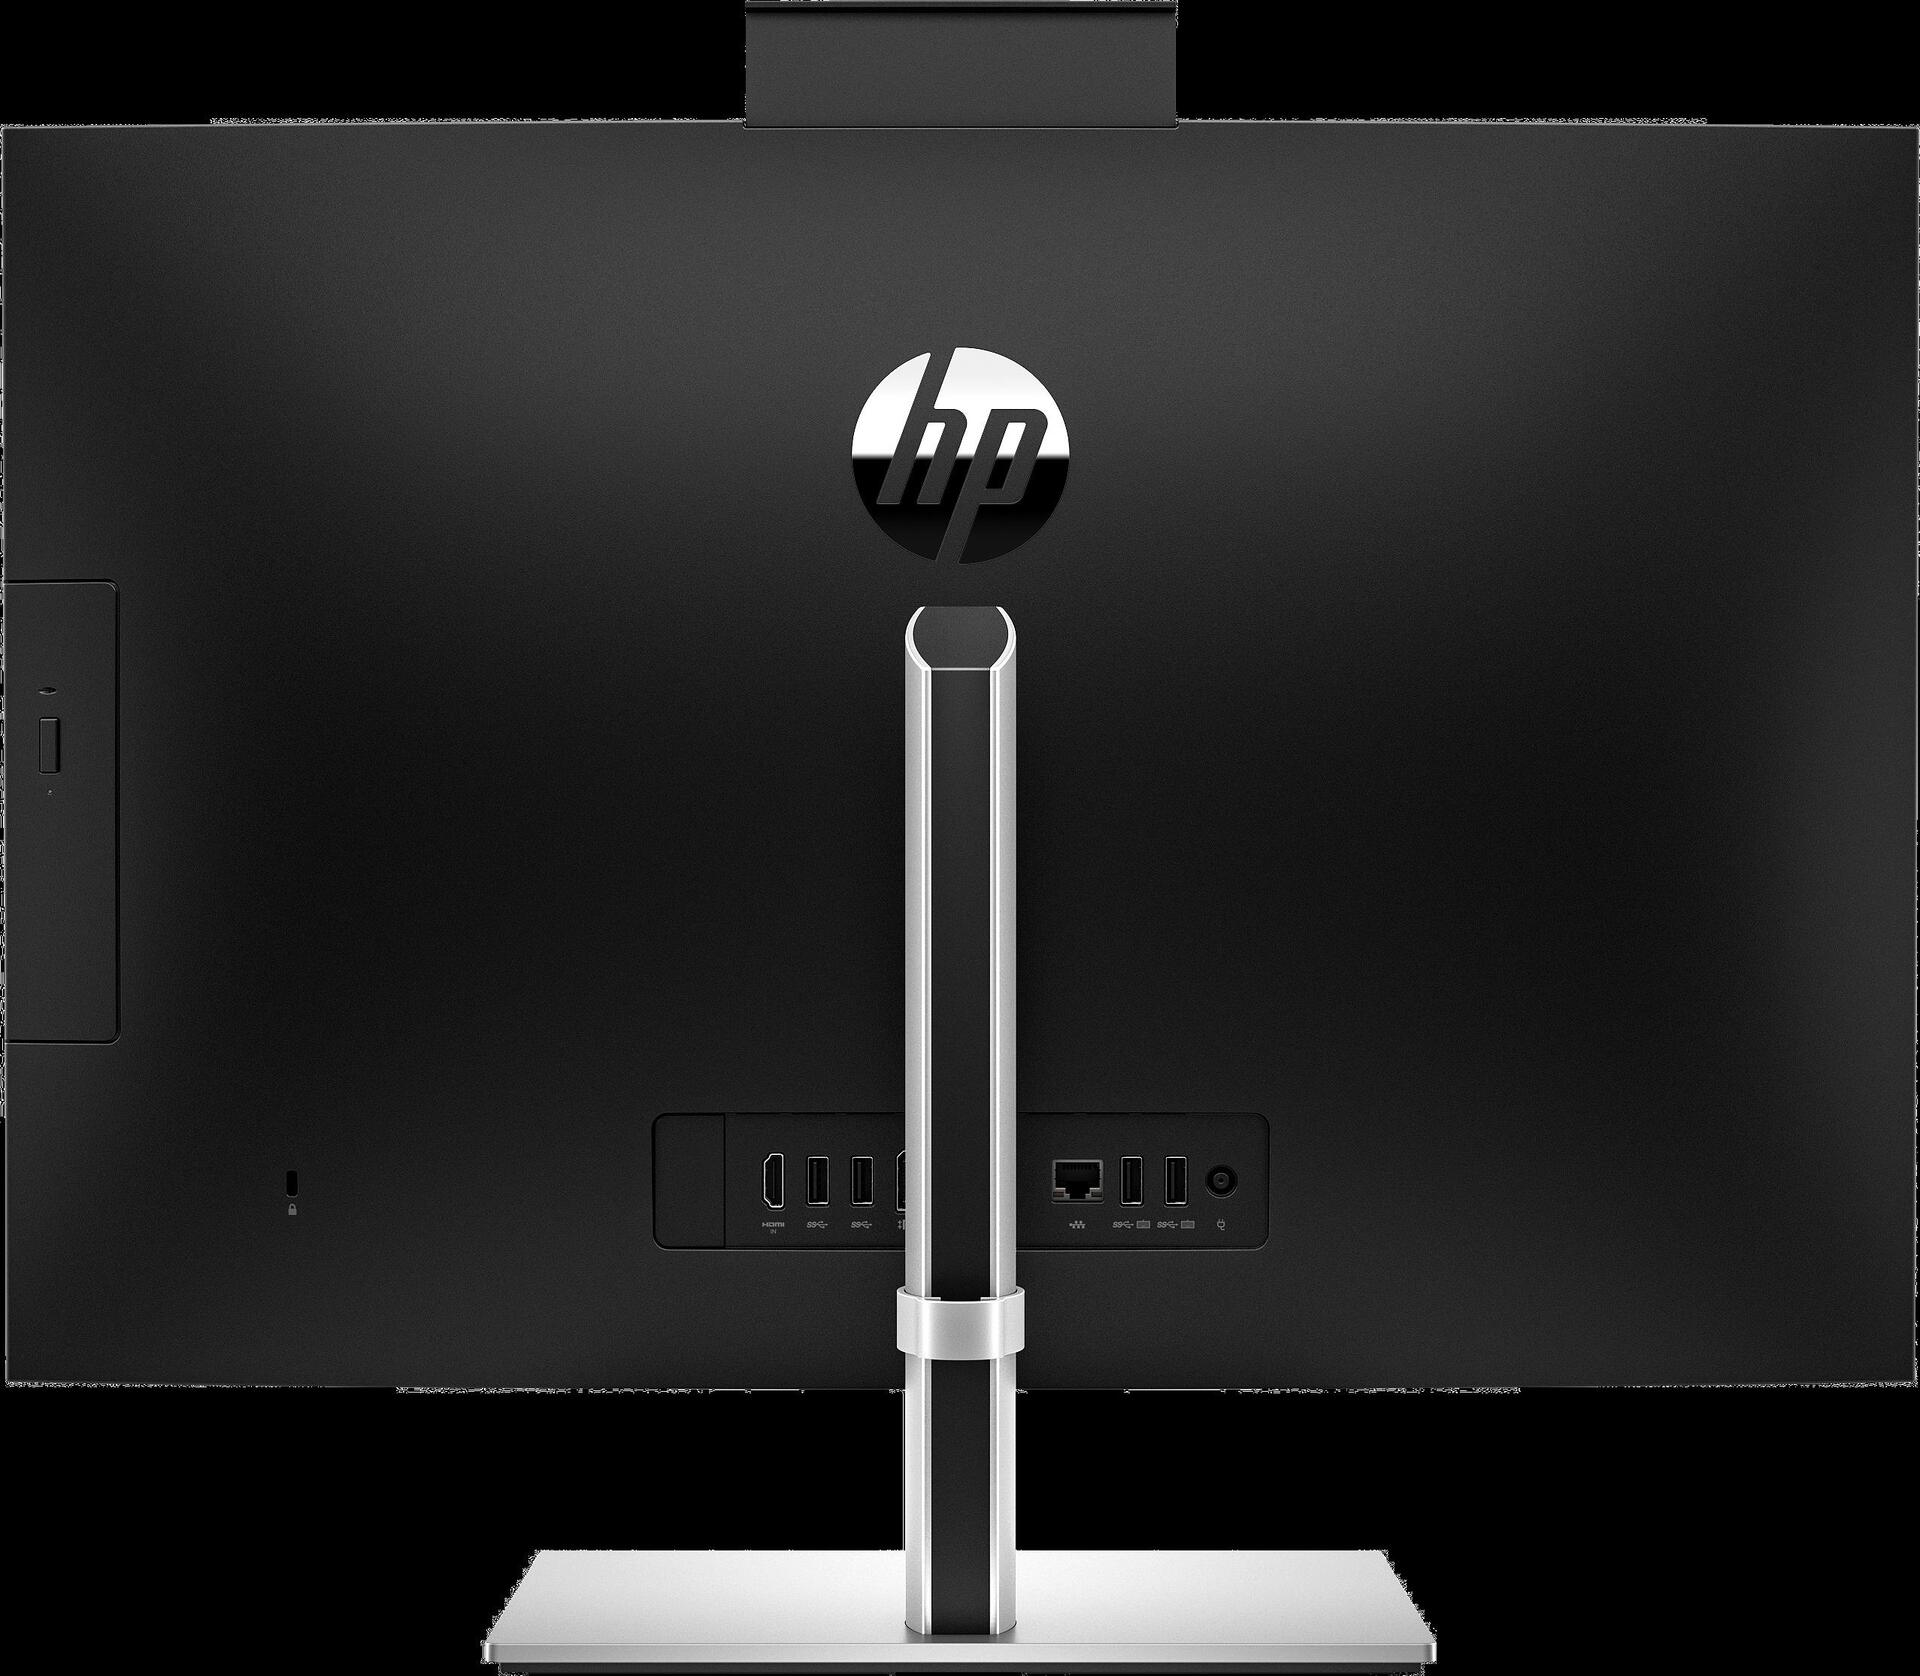 HP ProOne 440 G9 - All-in-One (Komplettlösung) - Core i5 12400T / 1.8 GHz - RAM 16 GB - SSD 512 GB - NVMe - UHD Graphics 730 - GigE, Bluetooth 5.2, 802.11ax (Wi-Fi 6E) - WLAN: Bluetooth 5.2, 802.11a/b/g/n/ac/ax (Wi-Fi 6E) - Win 11 Pro - Monitor: LED 60.5 cm (23.8") 1920 x 1080 (Full HD) @ 60 Hz - Tastatur: Deutsch - mit HP 2 years Next Business Day Onsite Hardware Support for Desktops